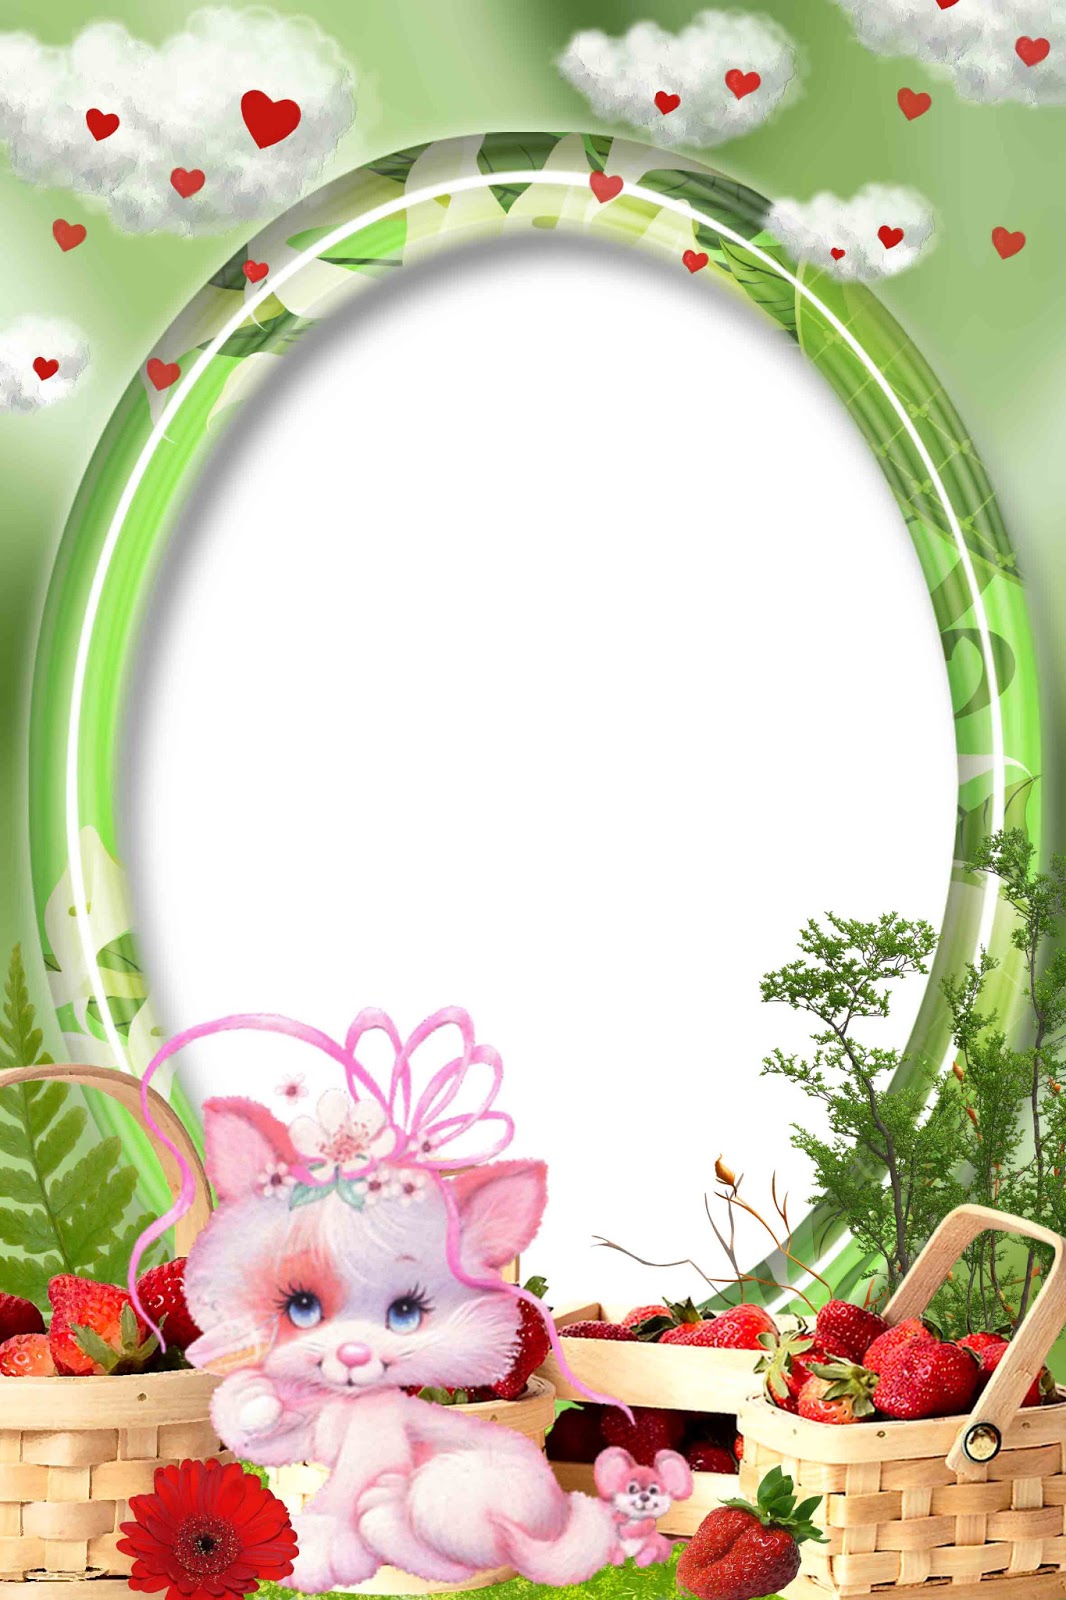 Baby Frames Wallpapers High Quality 